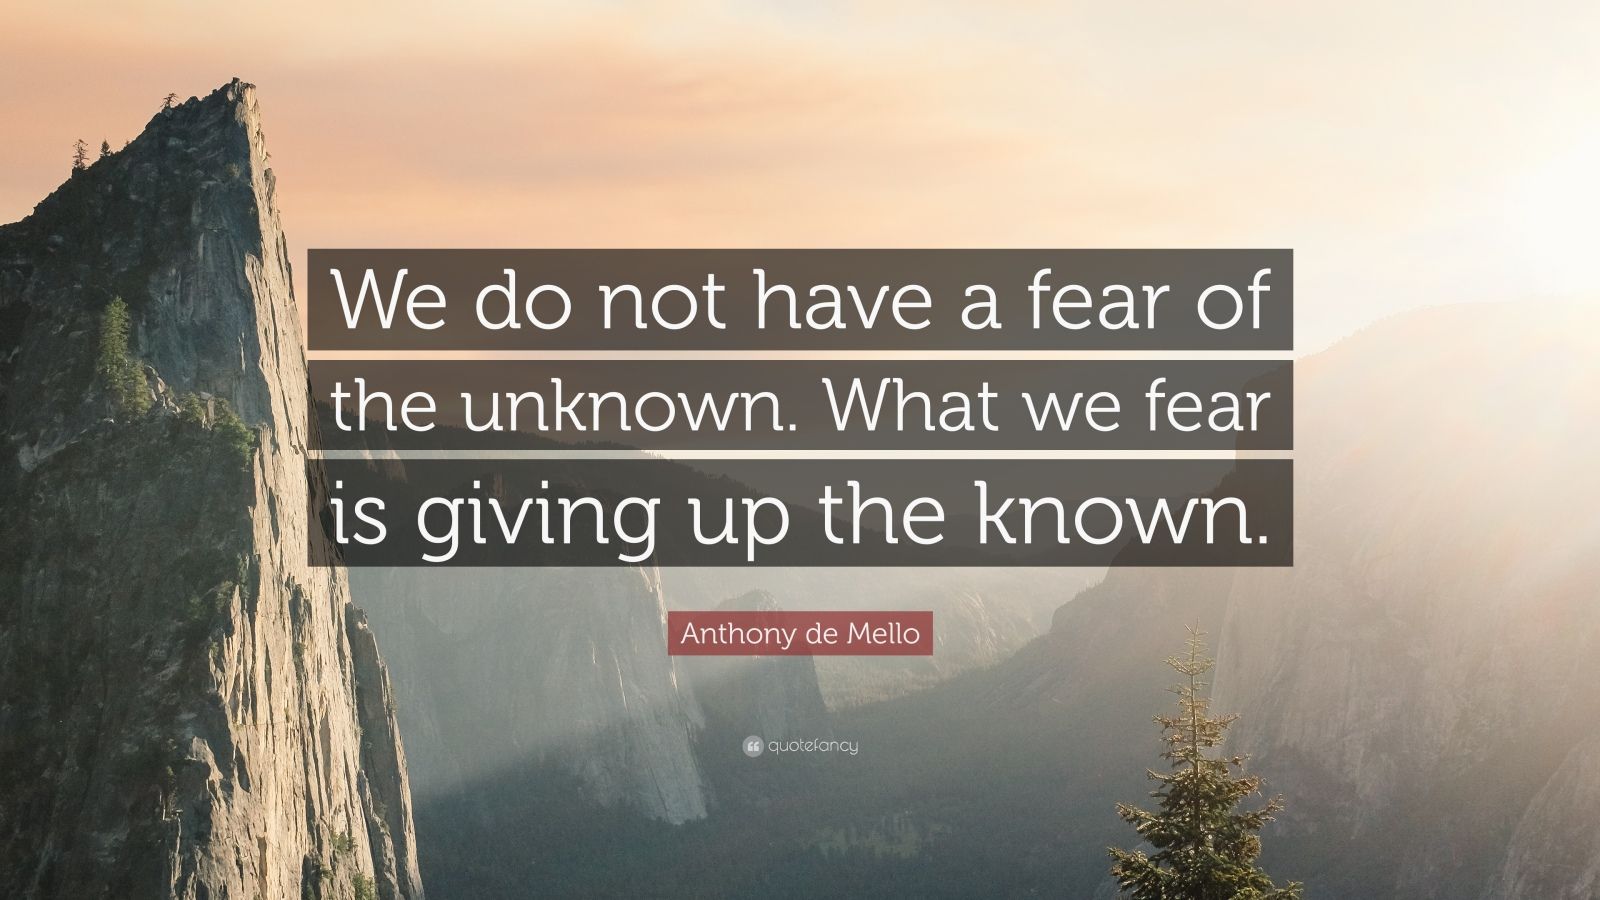 Anthony de Mello Quote: “We do not have a fear of the unknown. What we ...